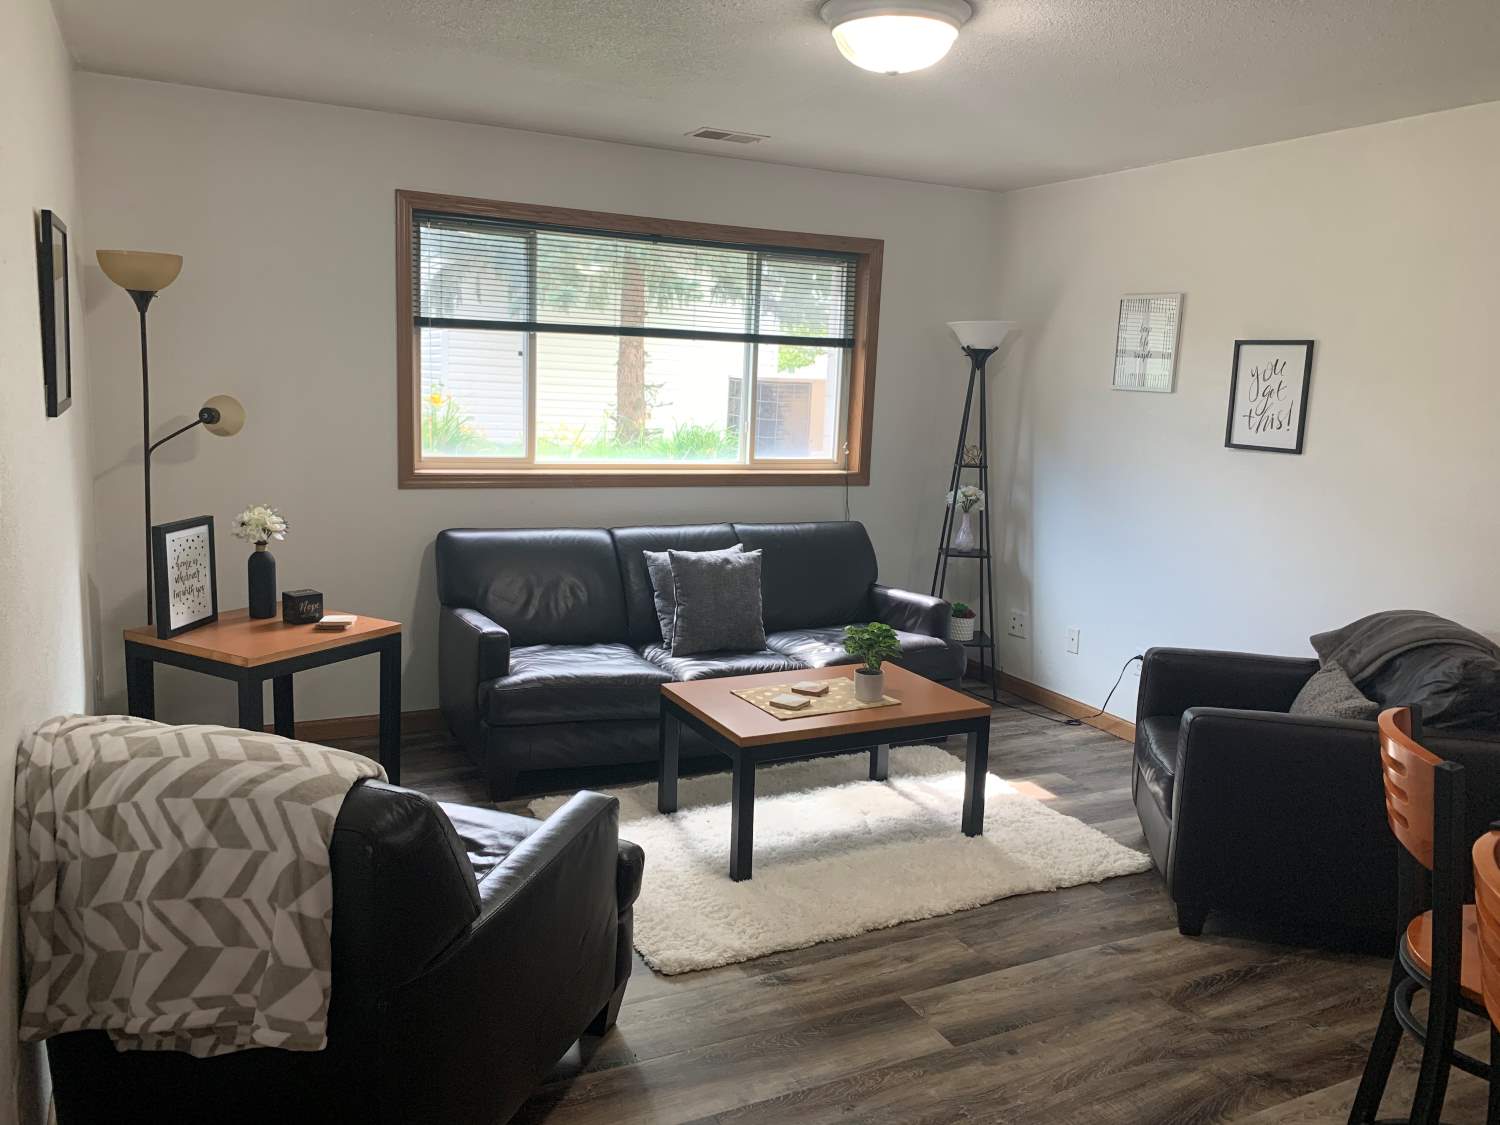 furnished apartment with table, couches and lamp